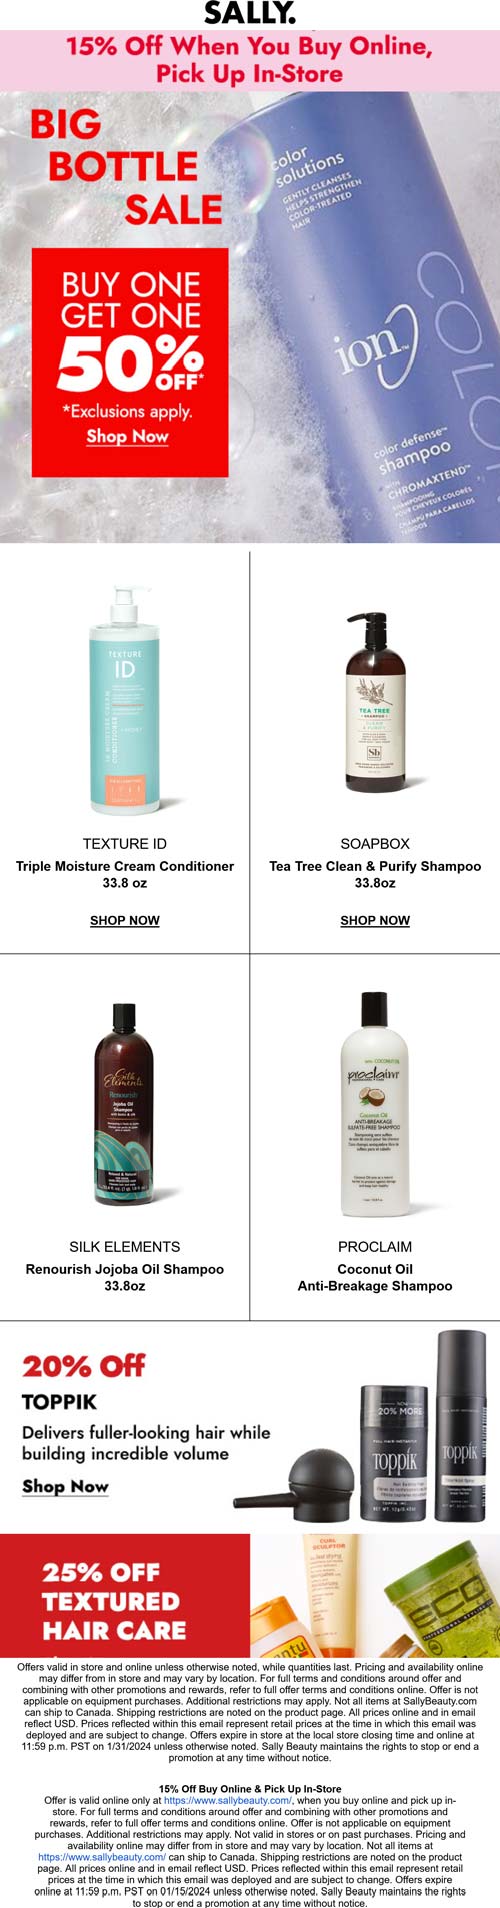 Sally stores Coupon  Second big bottle 50% off & more at Sally beauty #sally 